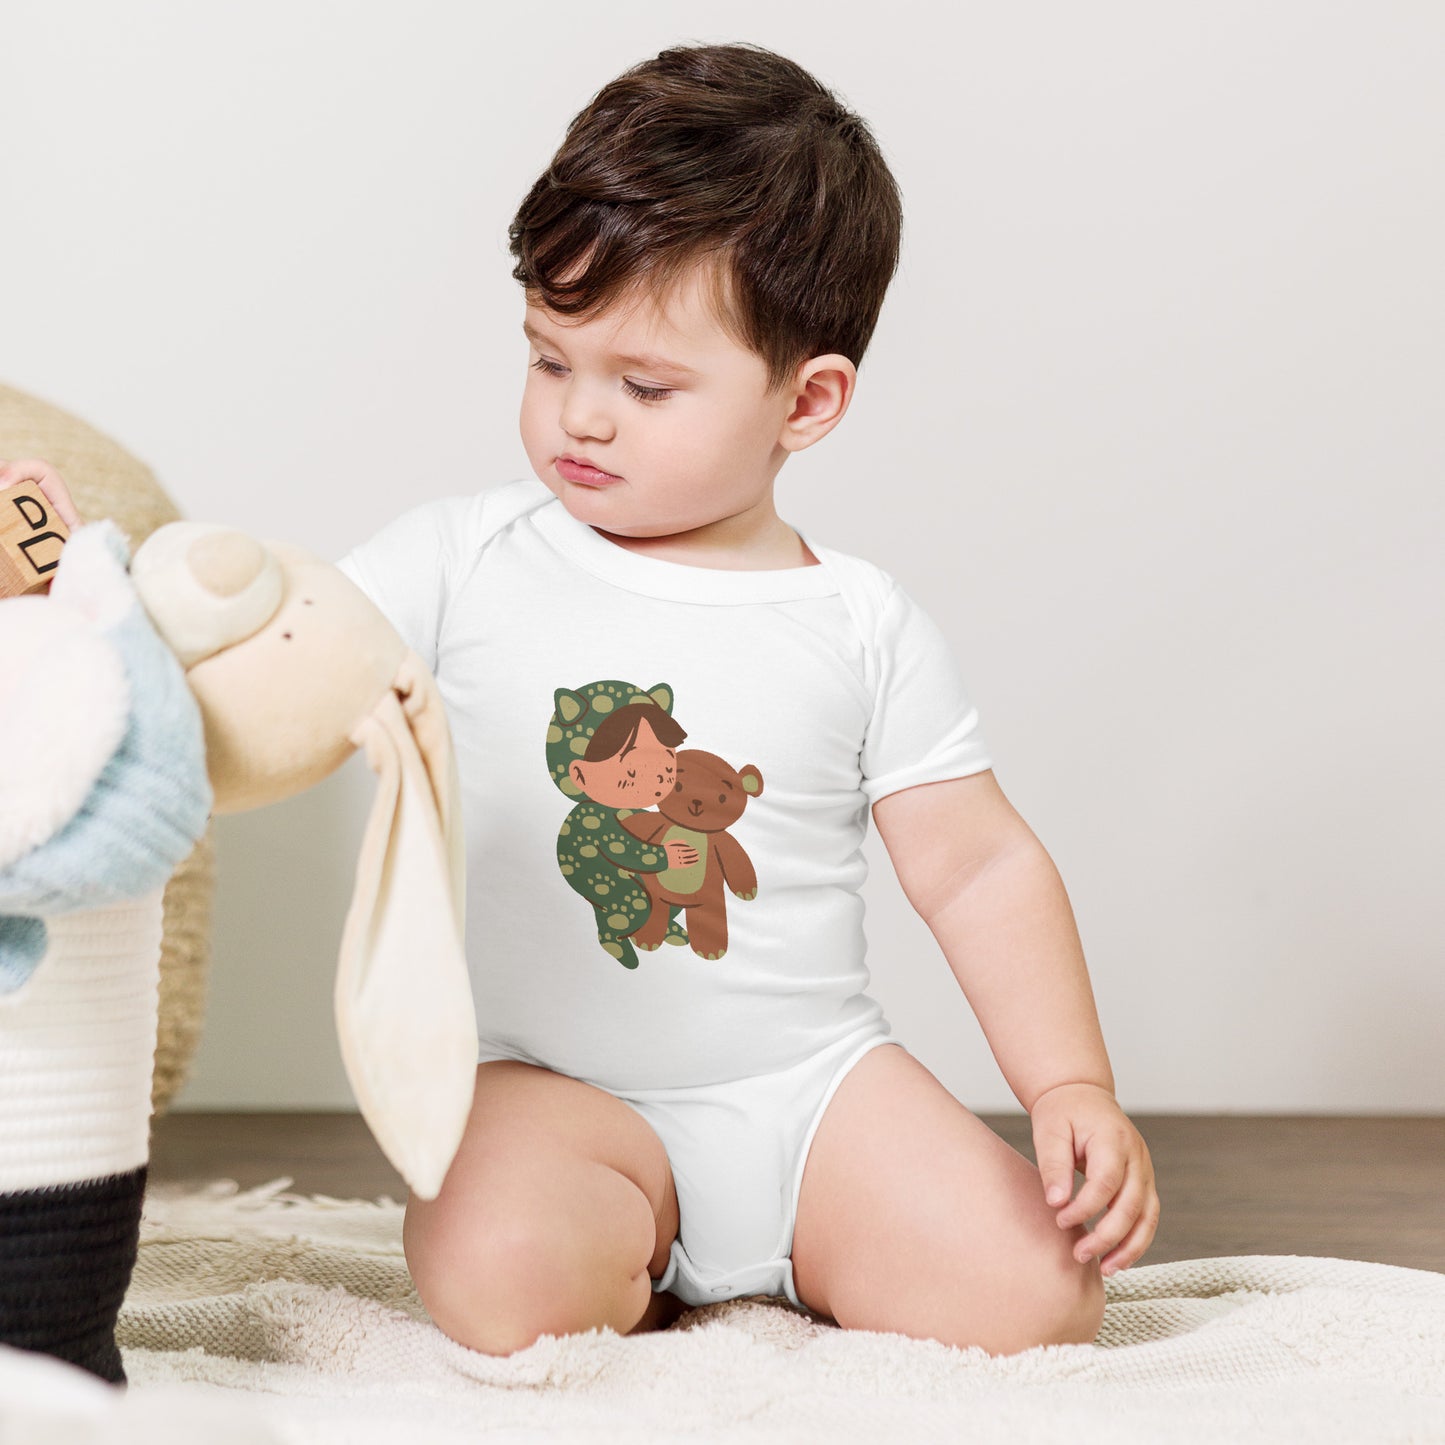 Sweet Baby with Teddy Bear Short Sleeve One Piece - Cozy Cotton, Adorable Design, Cuddle Time